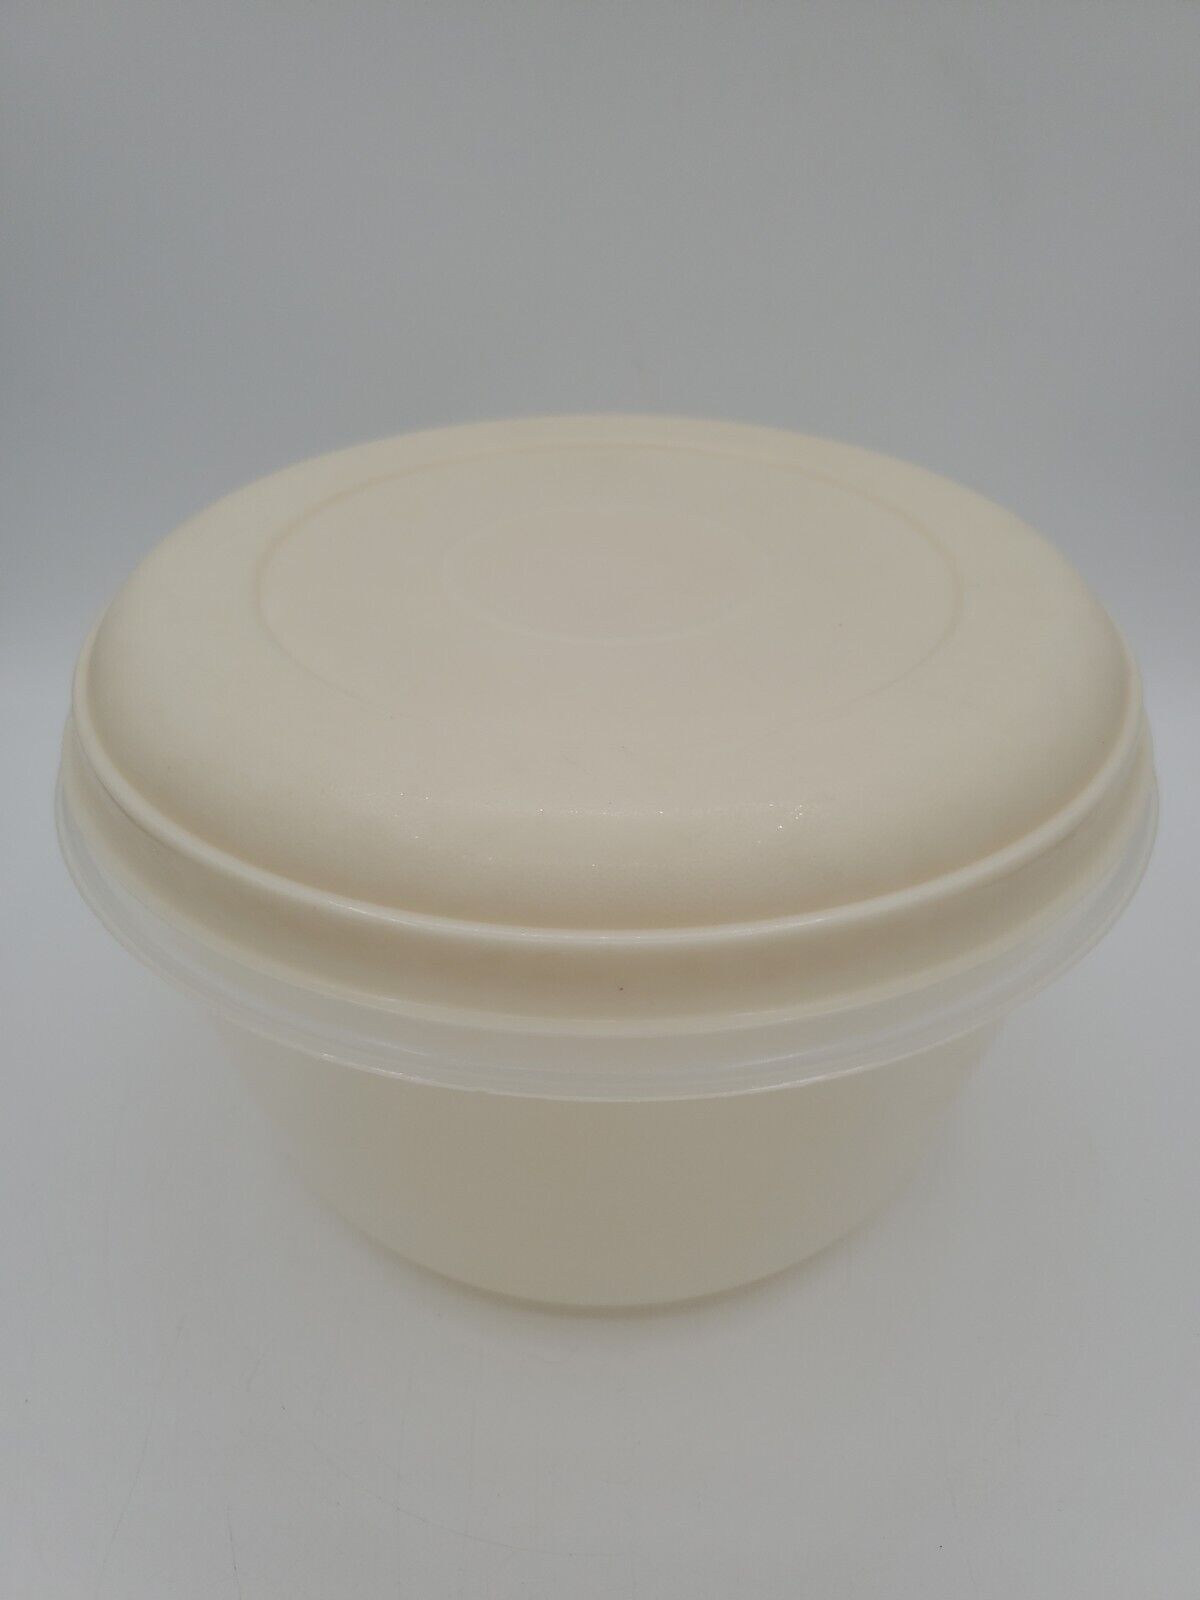 Vintage Rubbermaid Servin Saver #10 72oz Storage Container with Almond Lid #0169